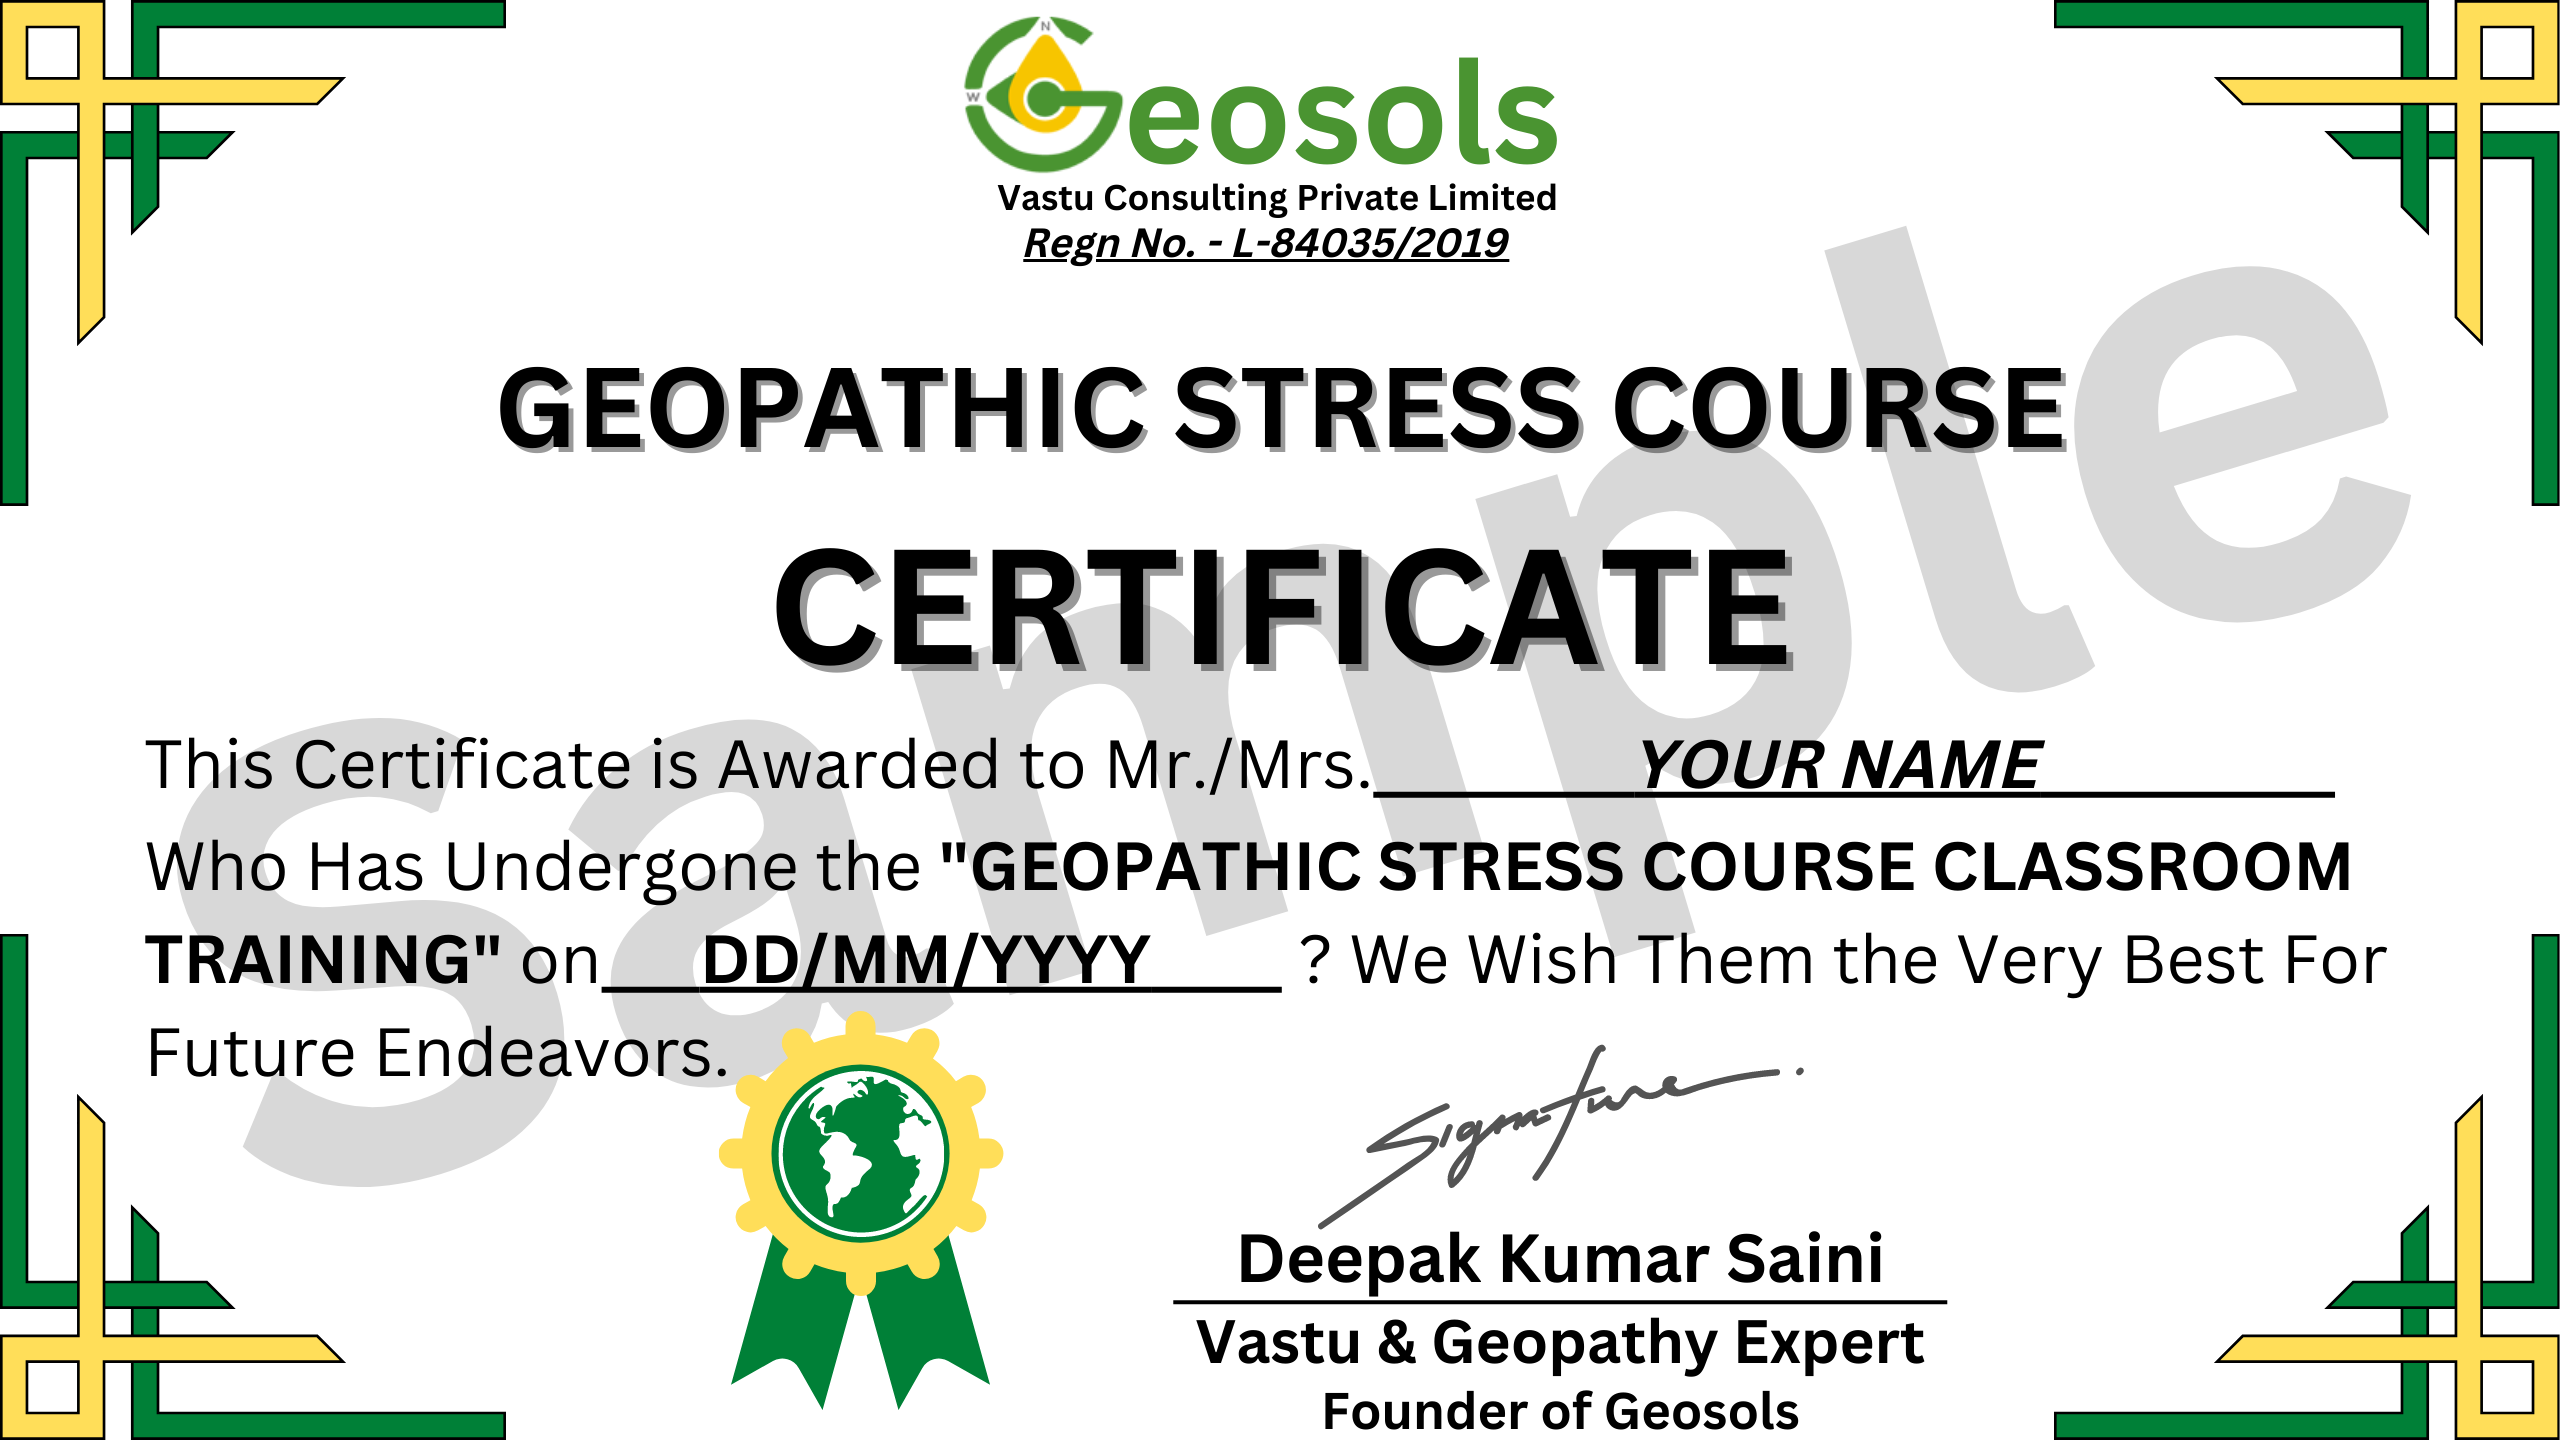 Geopathic Stress Course Classroom raining Certificate